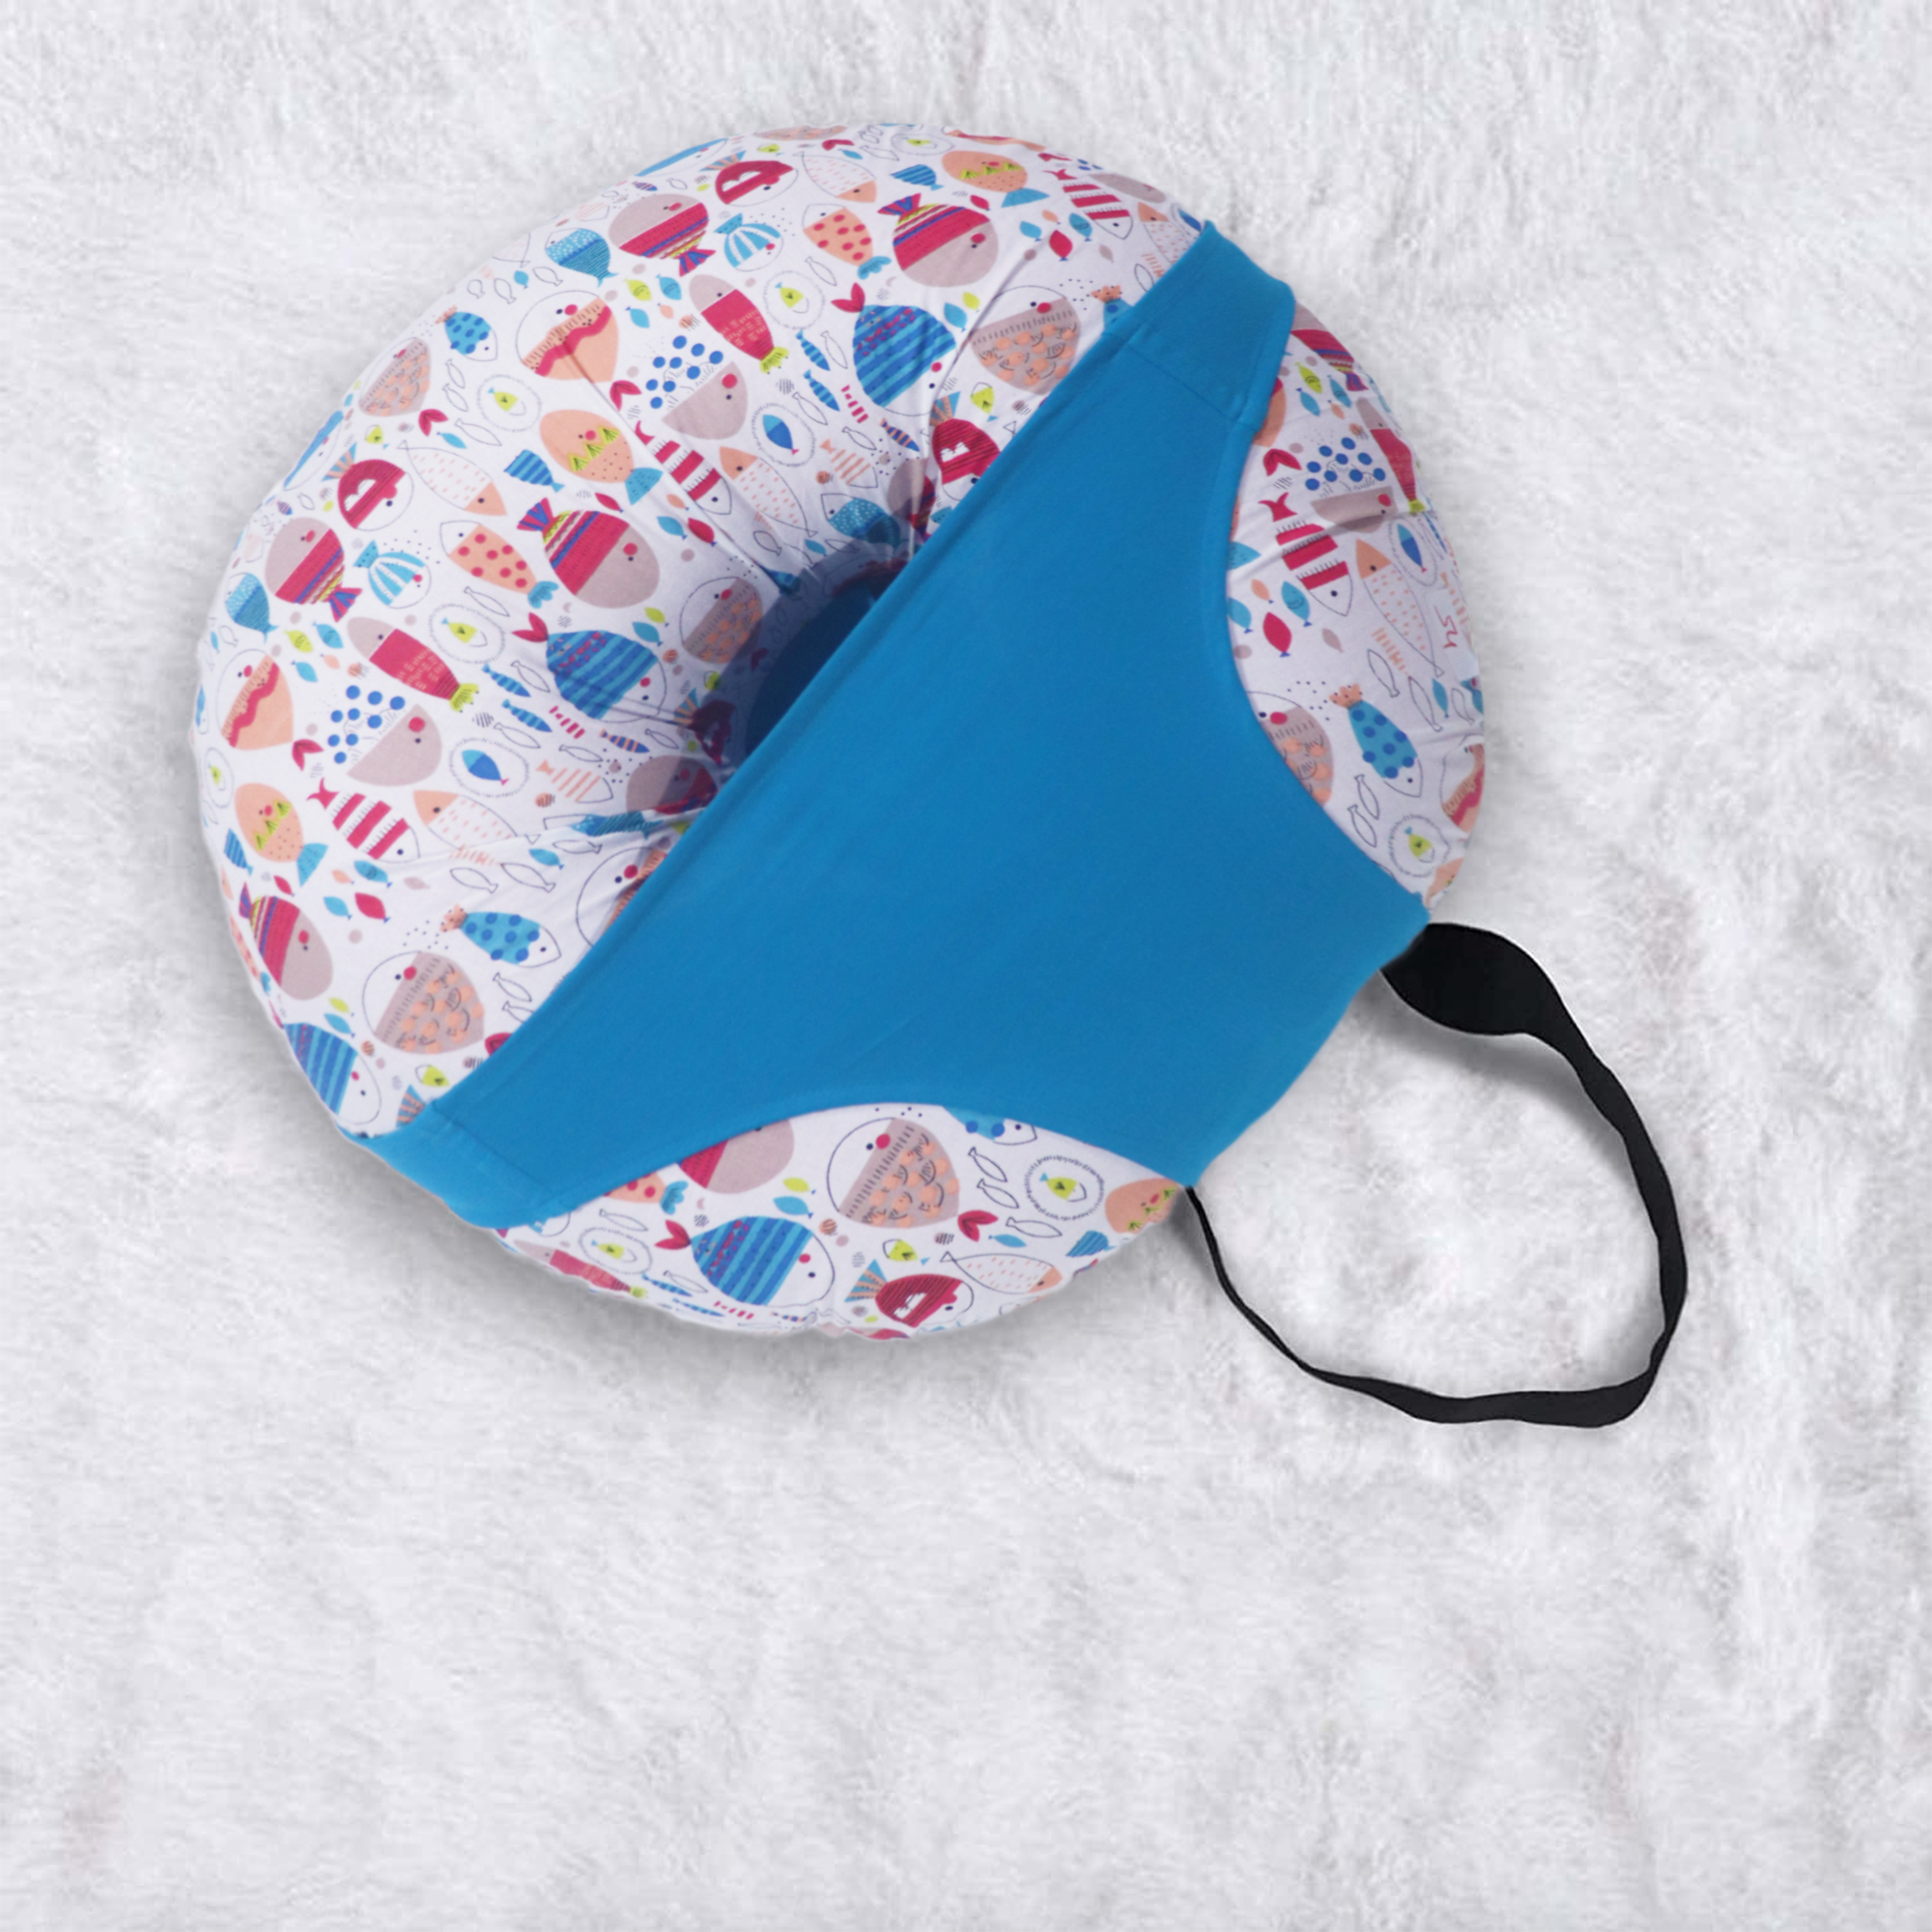 Fishes in Color - Baby Feeding Pillow | Nursing Pillow | Breastfeeding Pillow